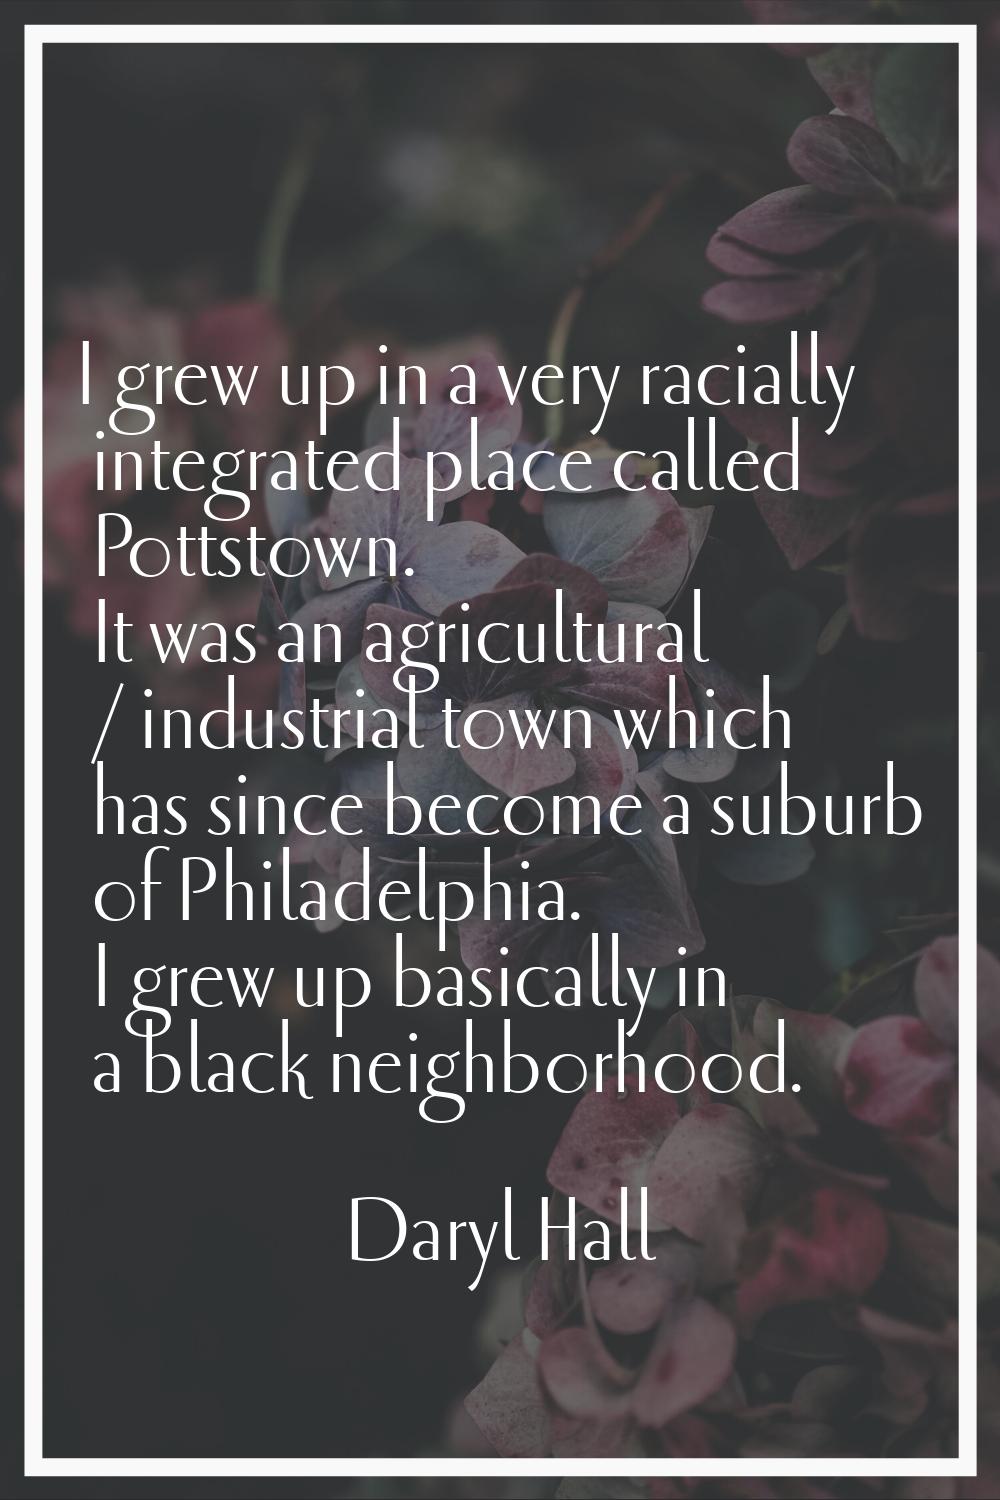 I grew up in a very racially integrated place called Pottstown. It was an agricultural / industrial